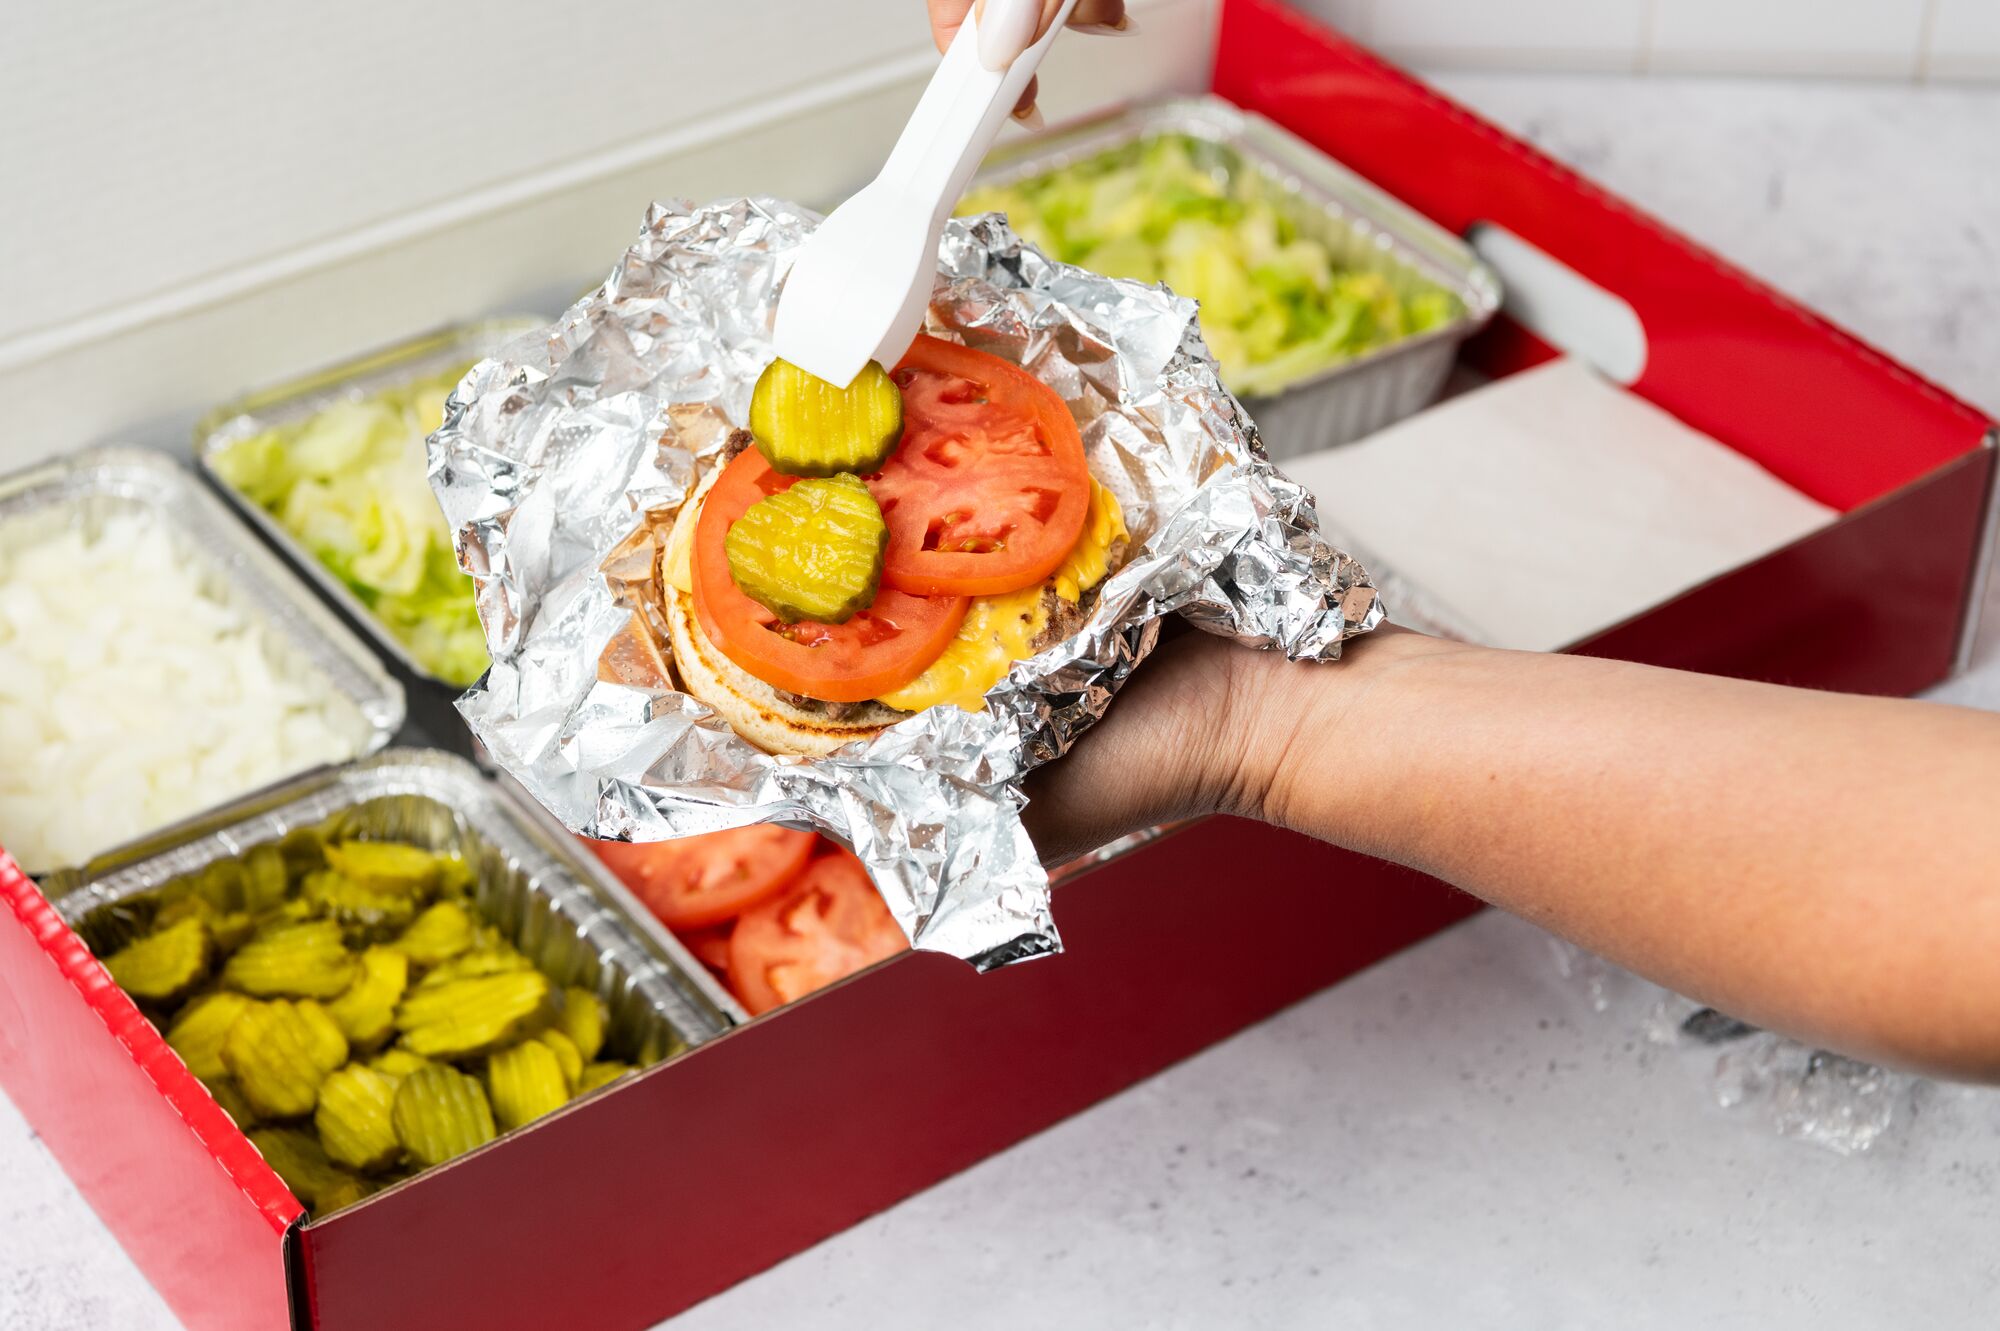 A close-up photo of a person putting pickles on their cheeseburger in front of a Five Guys catering  Five Guys Thousand Oaks (805)496-0173